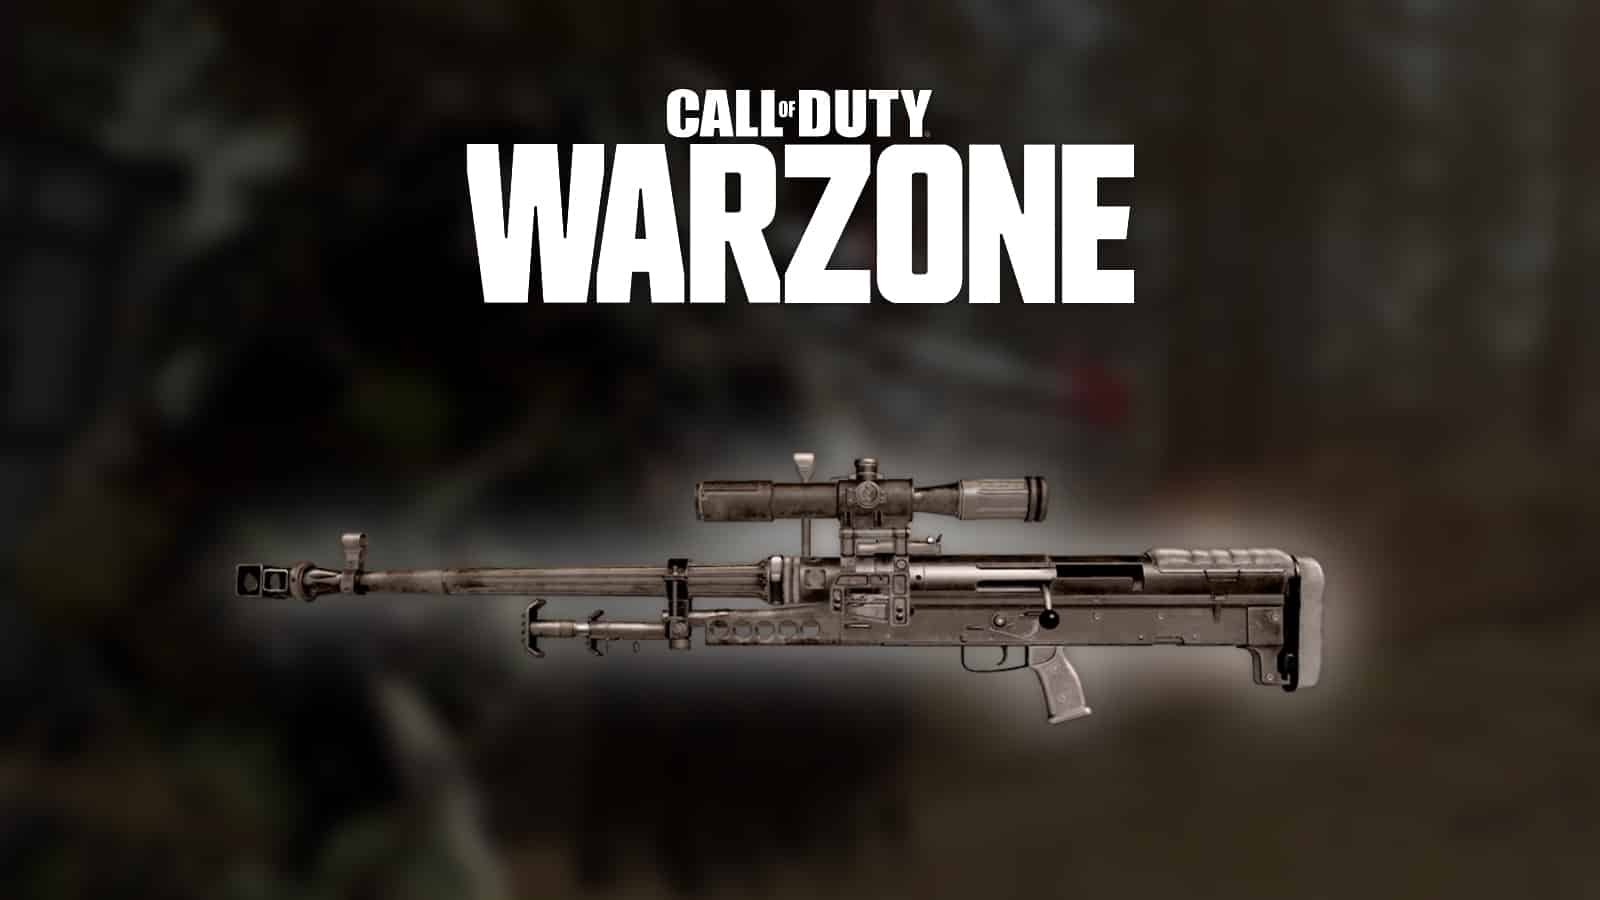 You can unlock CoD: Black Ops Cold War, Warzone's ZRG 20mm sniper